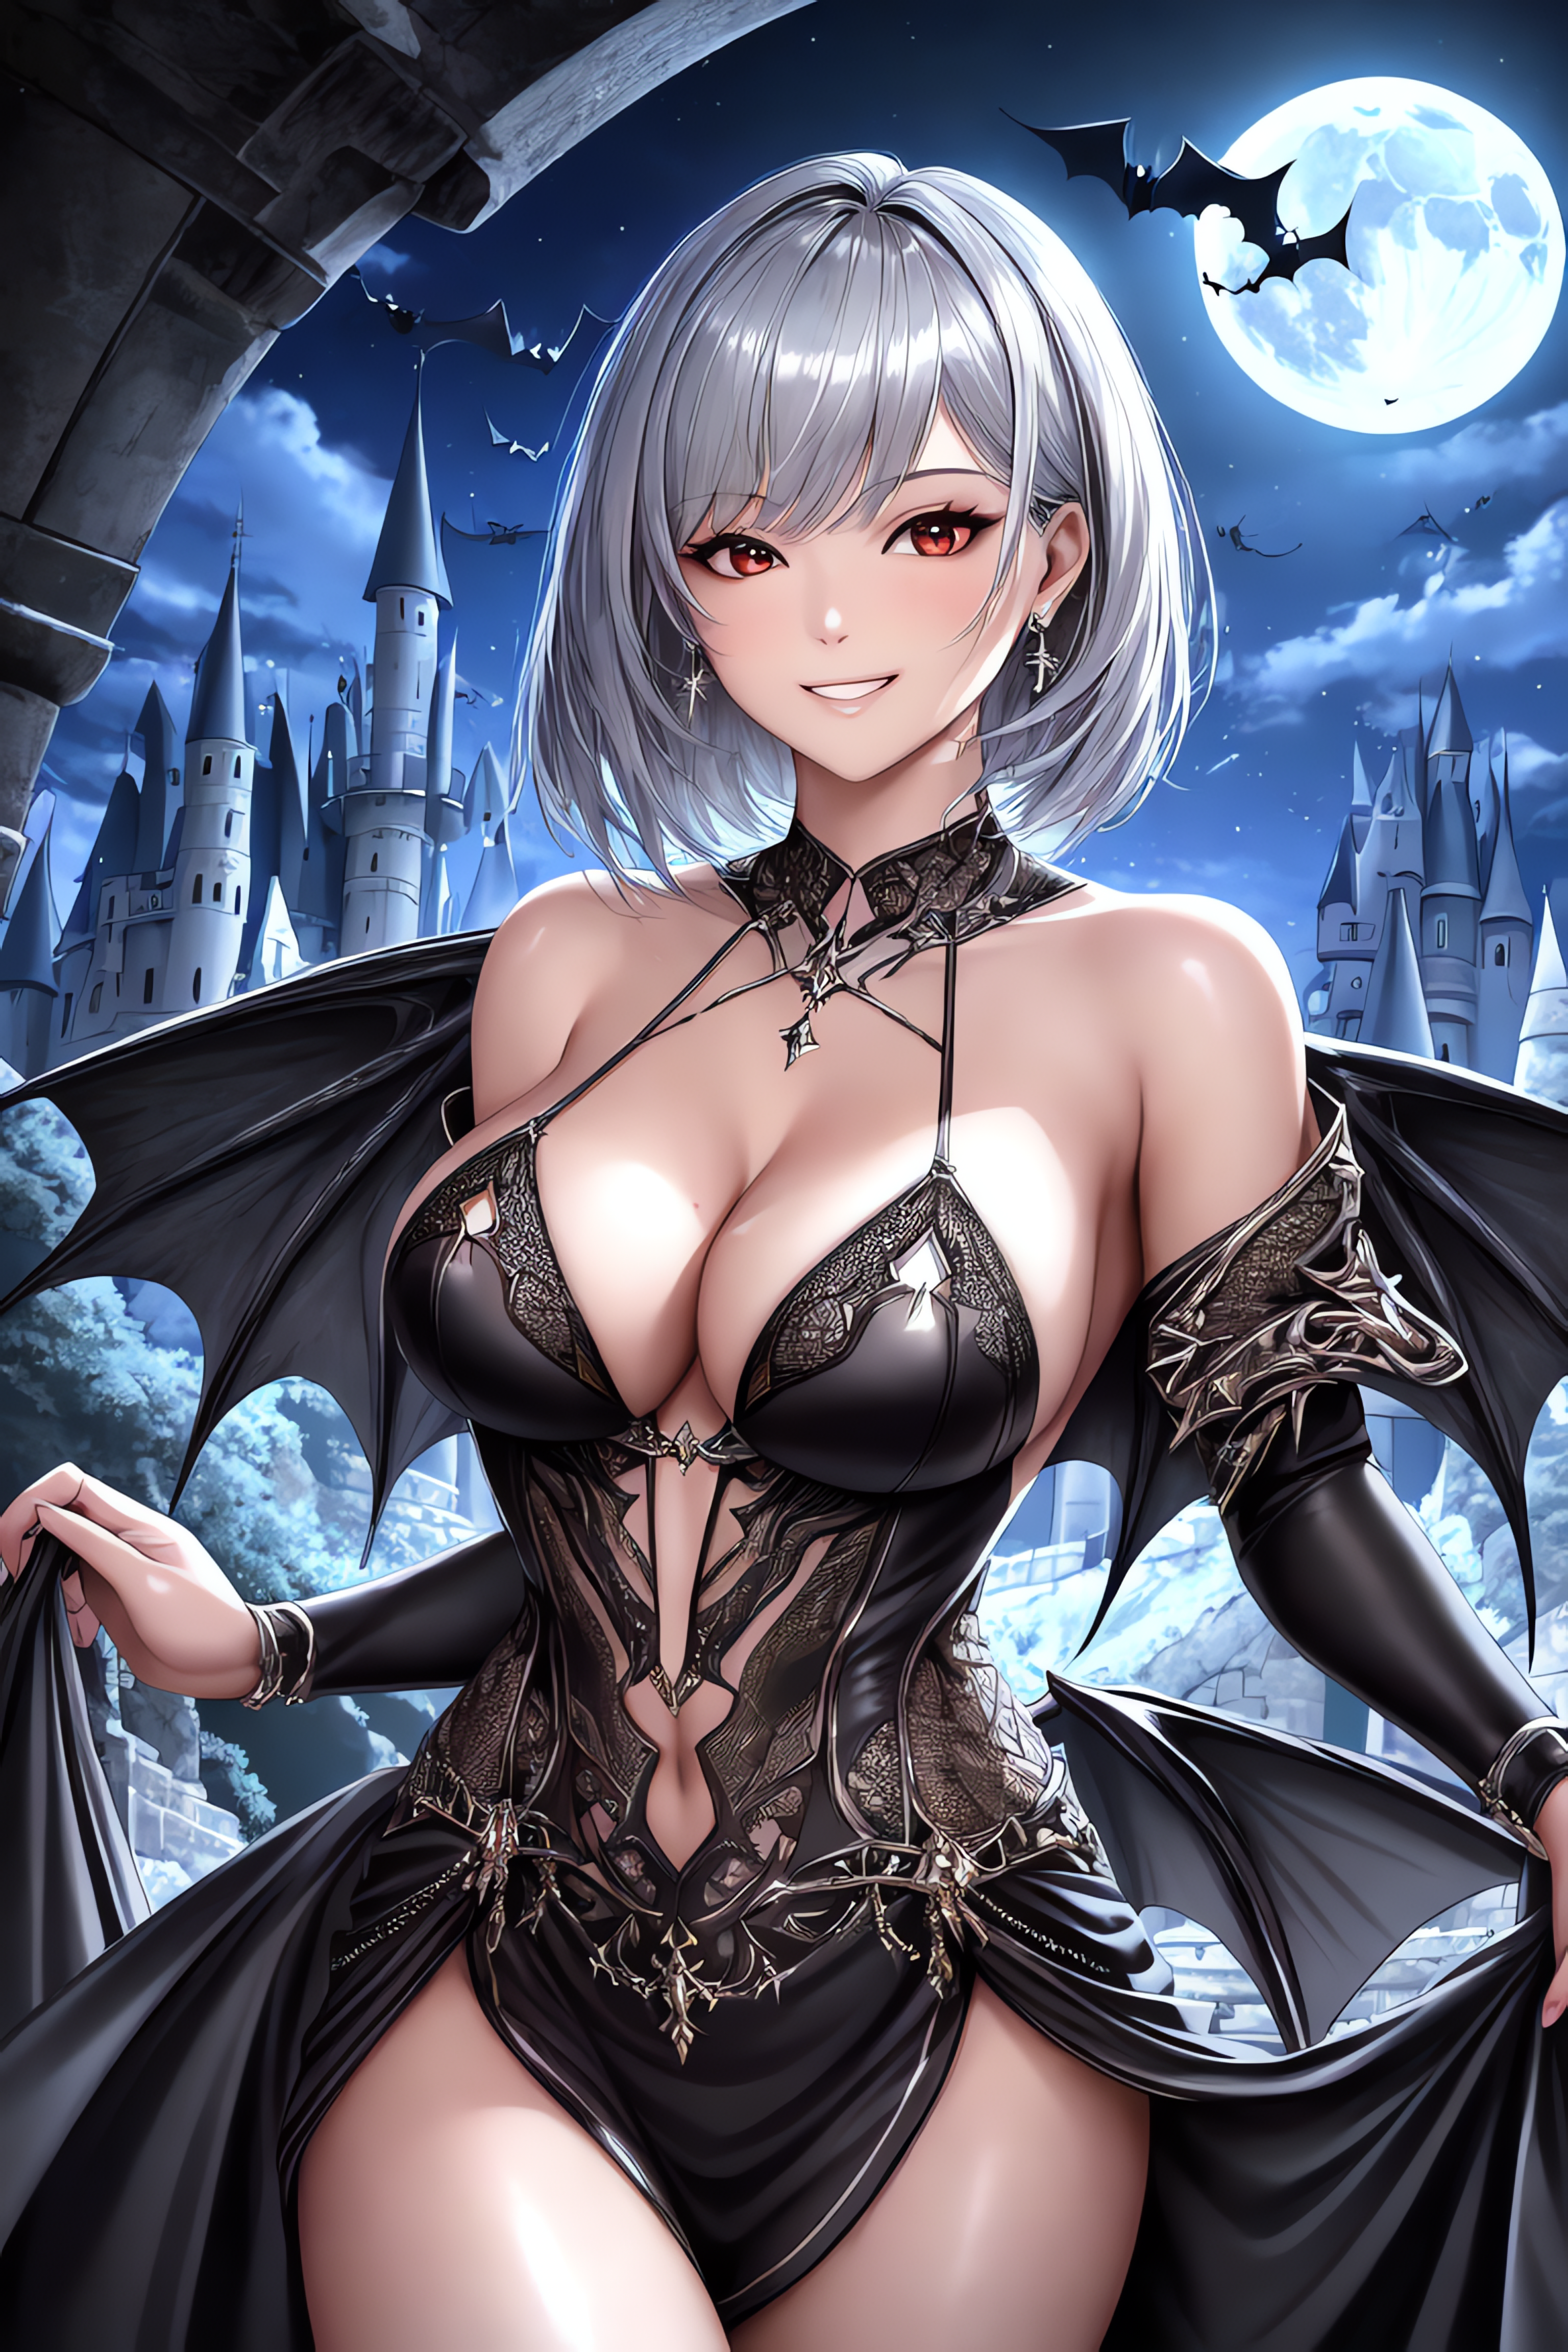 Anime 3072x4608 anime anime girls AI art artwork digital art original characters lifting clothes cleavage big boobs Moon bats smiling earring wings bat wings looking at viewer portrait display